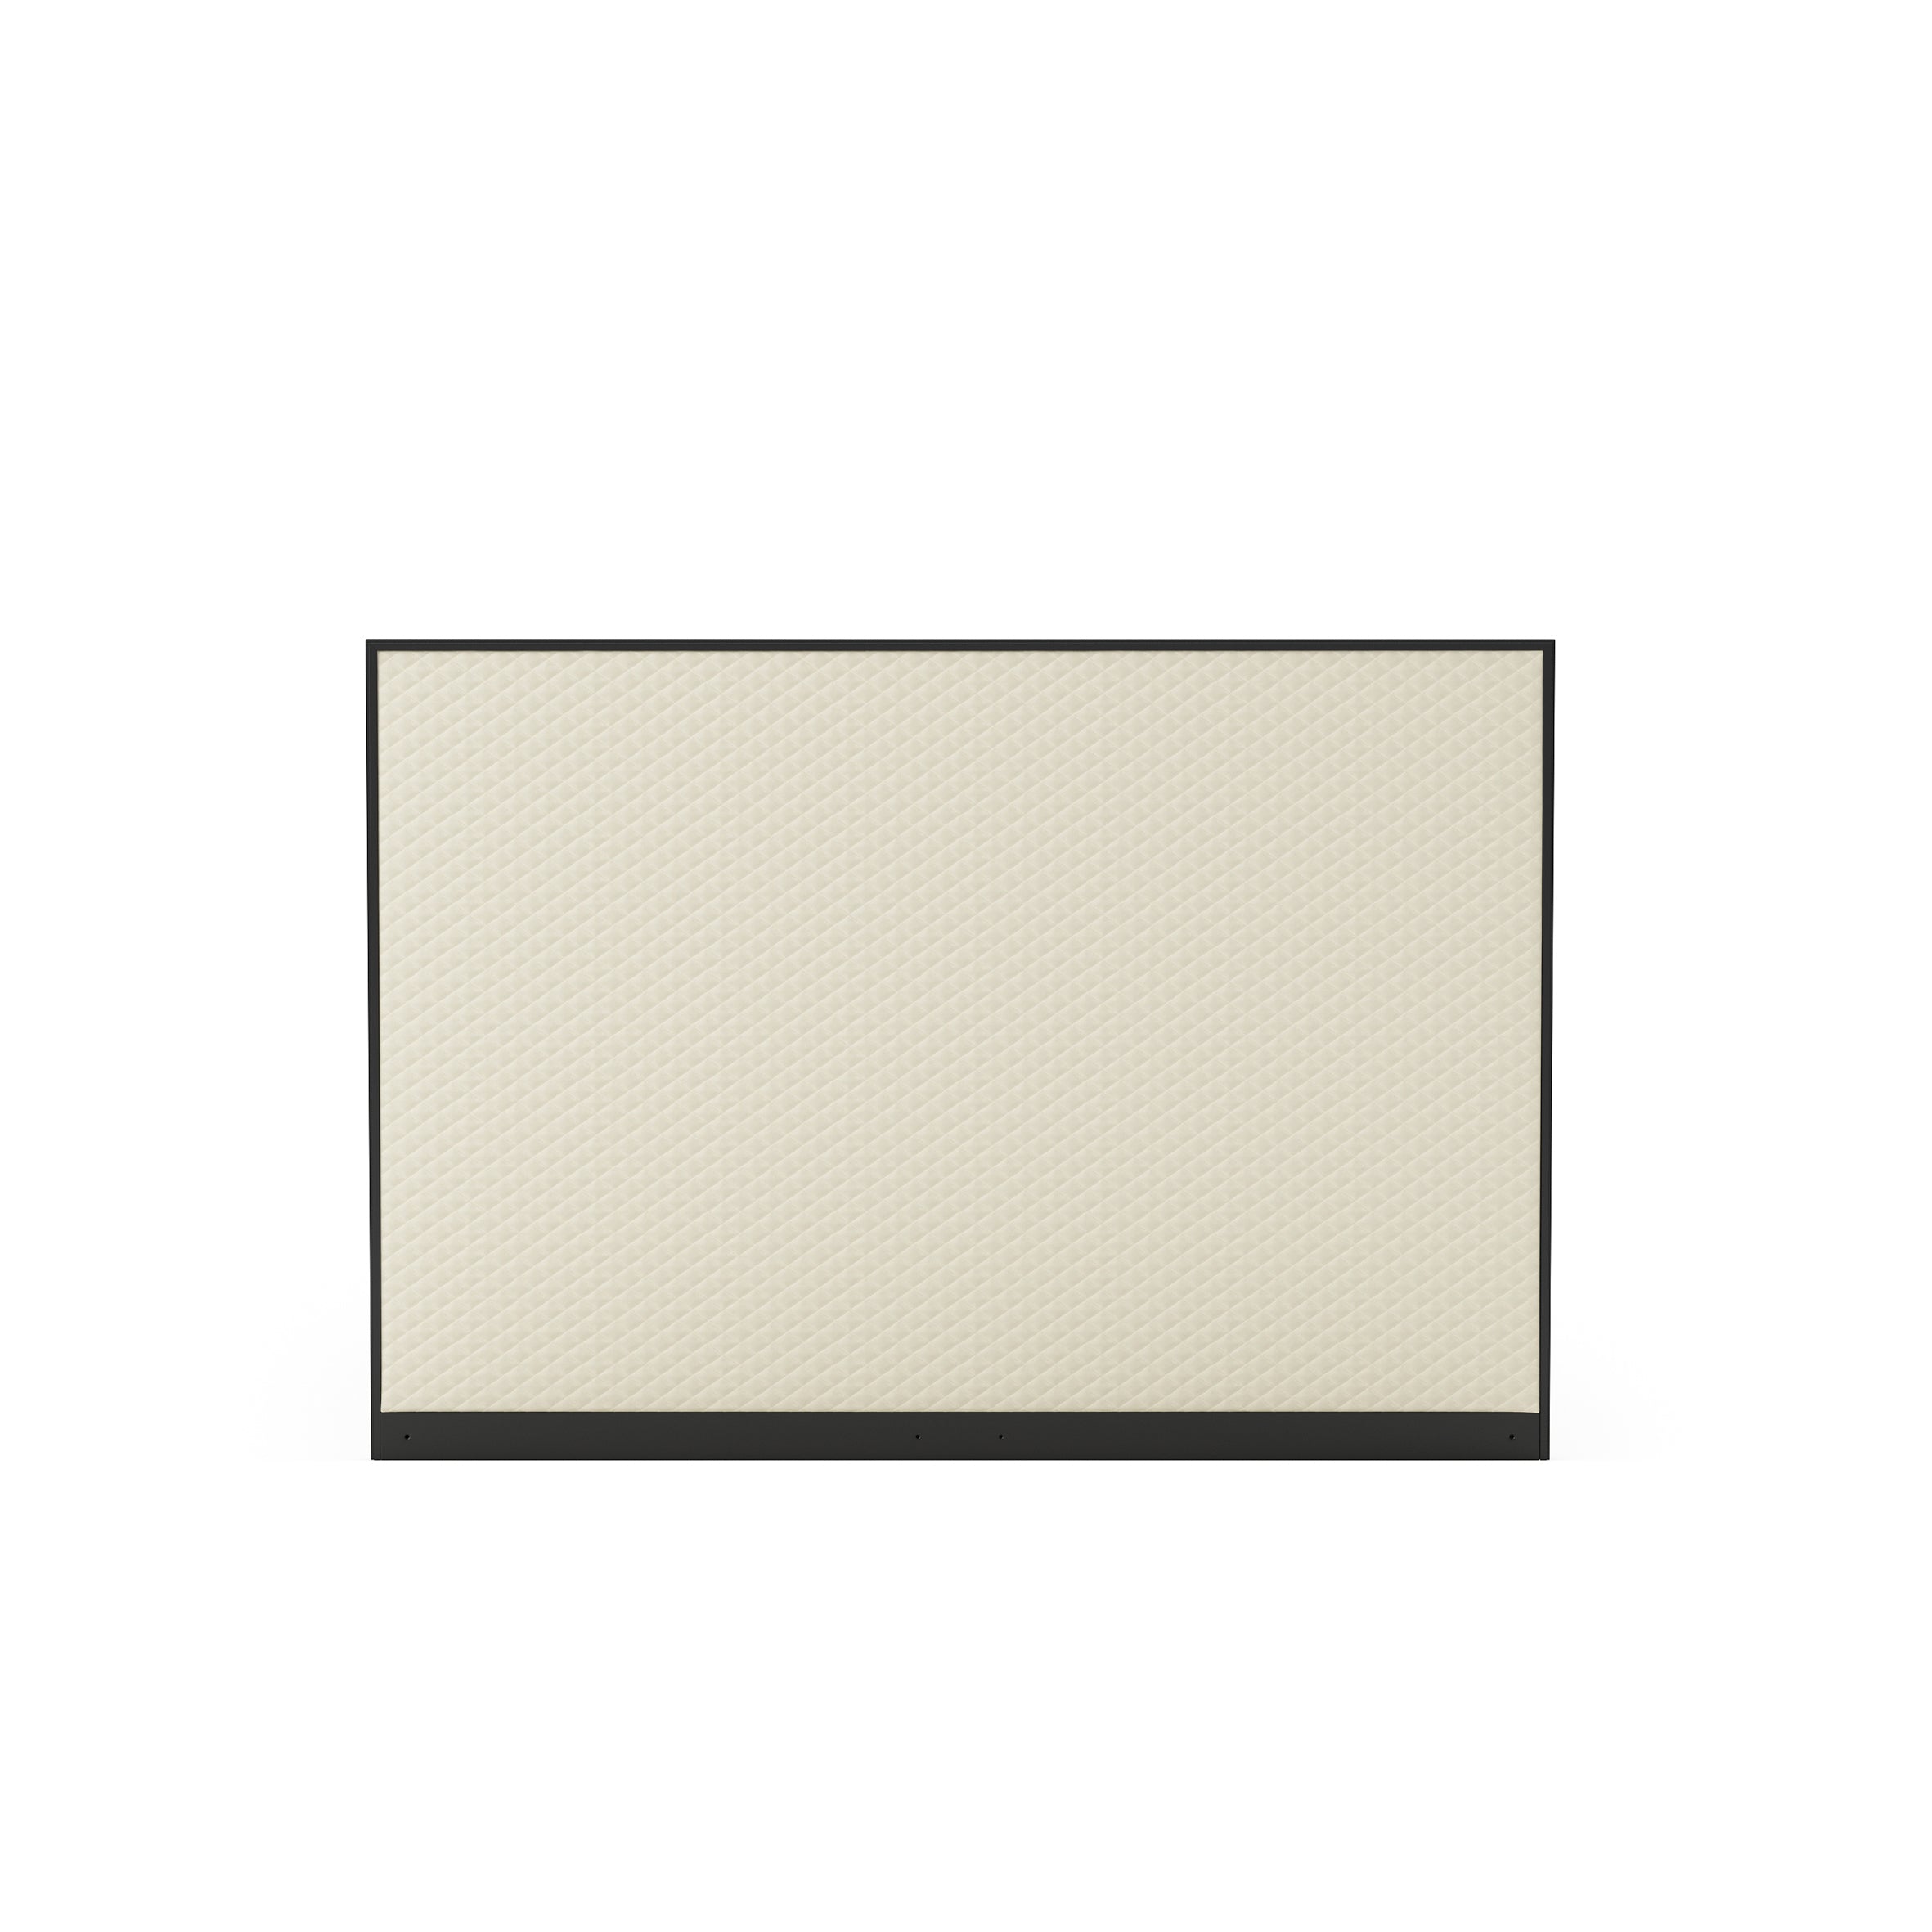 Englesson Beds Pearl / 160 x 125 Edge Sänggavel GED160-ES #Färg_Pearl #Colour_Pearl